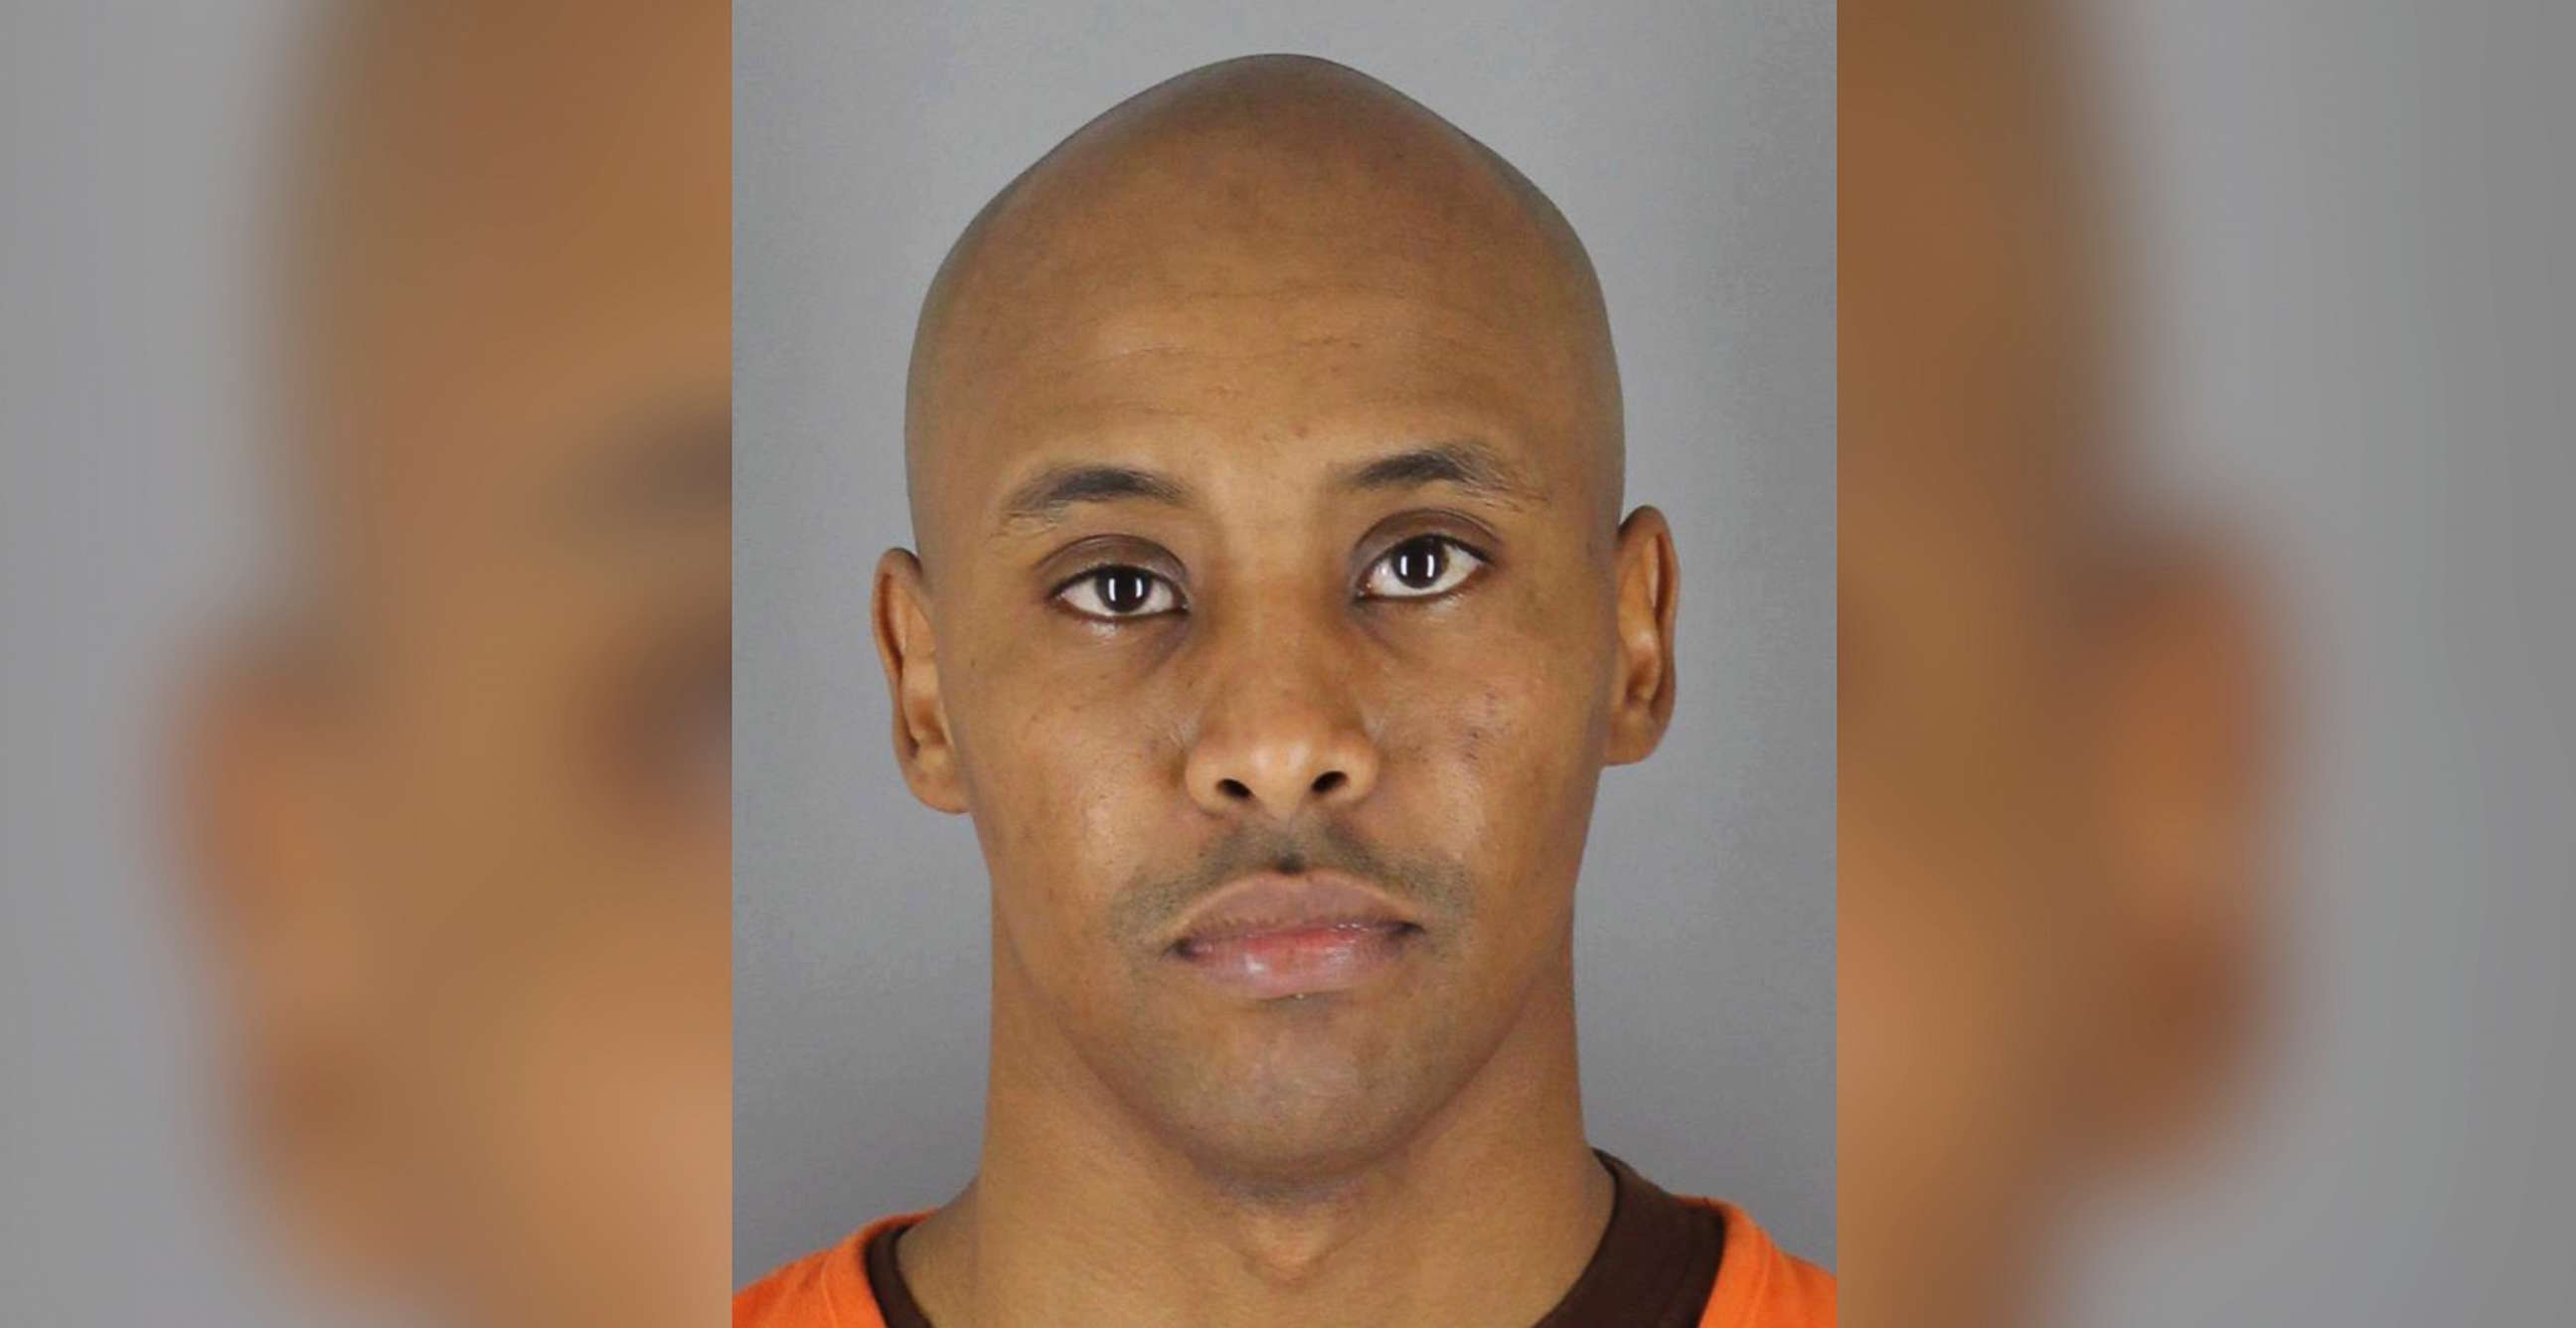 PHOTO: Minneapolis Police Officer Mohamed Noor turned himself into authorities on charges related to the shooting death of Australian woman Justine Damond.